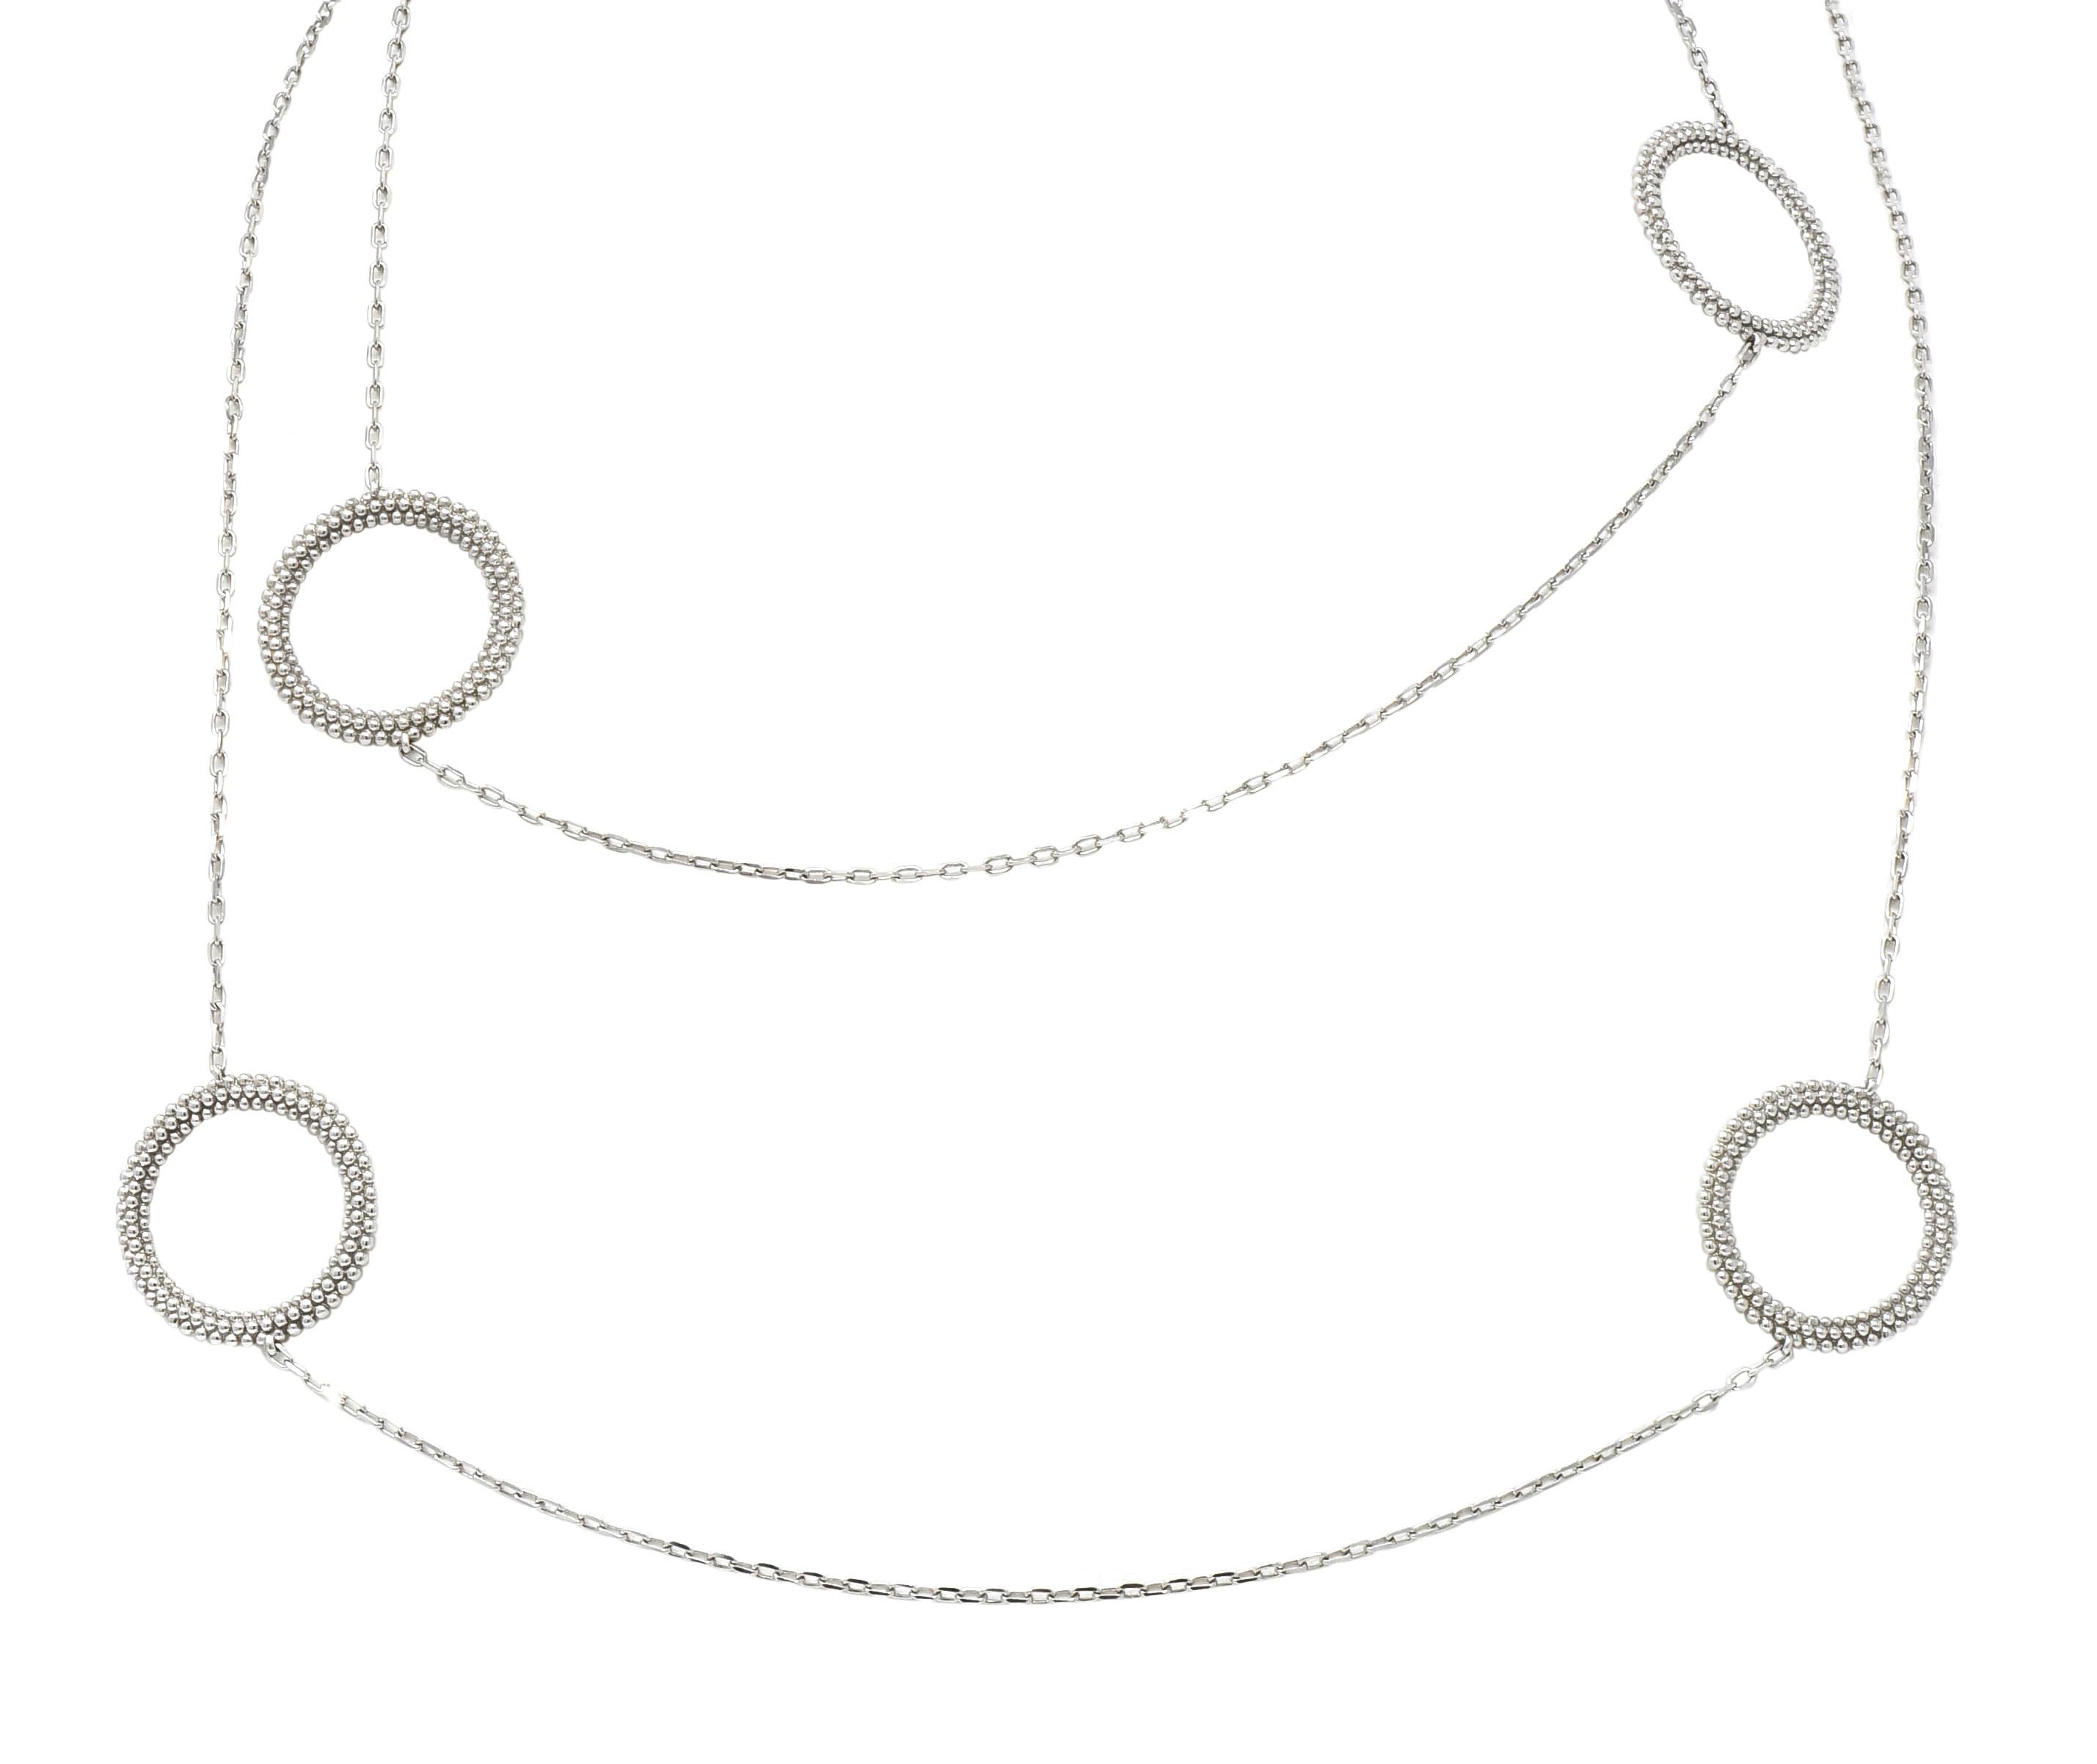 Necklace comprised of delicate elongated link chain with circular stations

Open circle motif stations with a textured, beaded finish

Completed by bar and toggle clasp

Fully signed Mauboussin, numbered, with French assay marks

Stamped 750 for 18